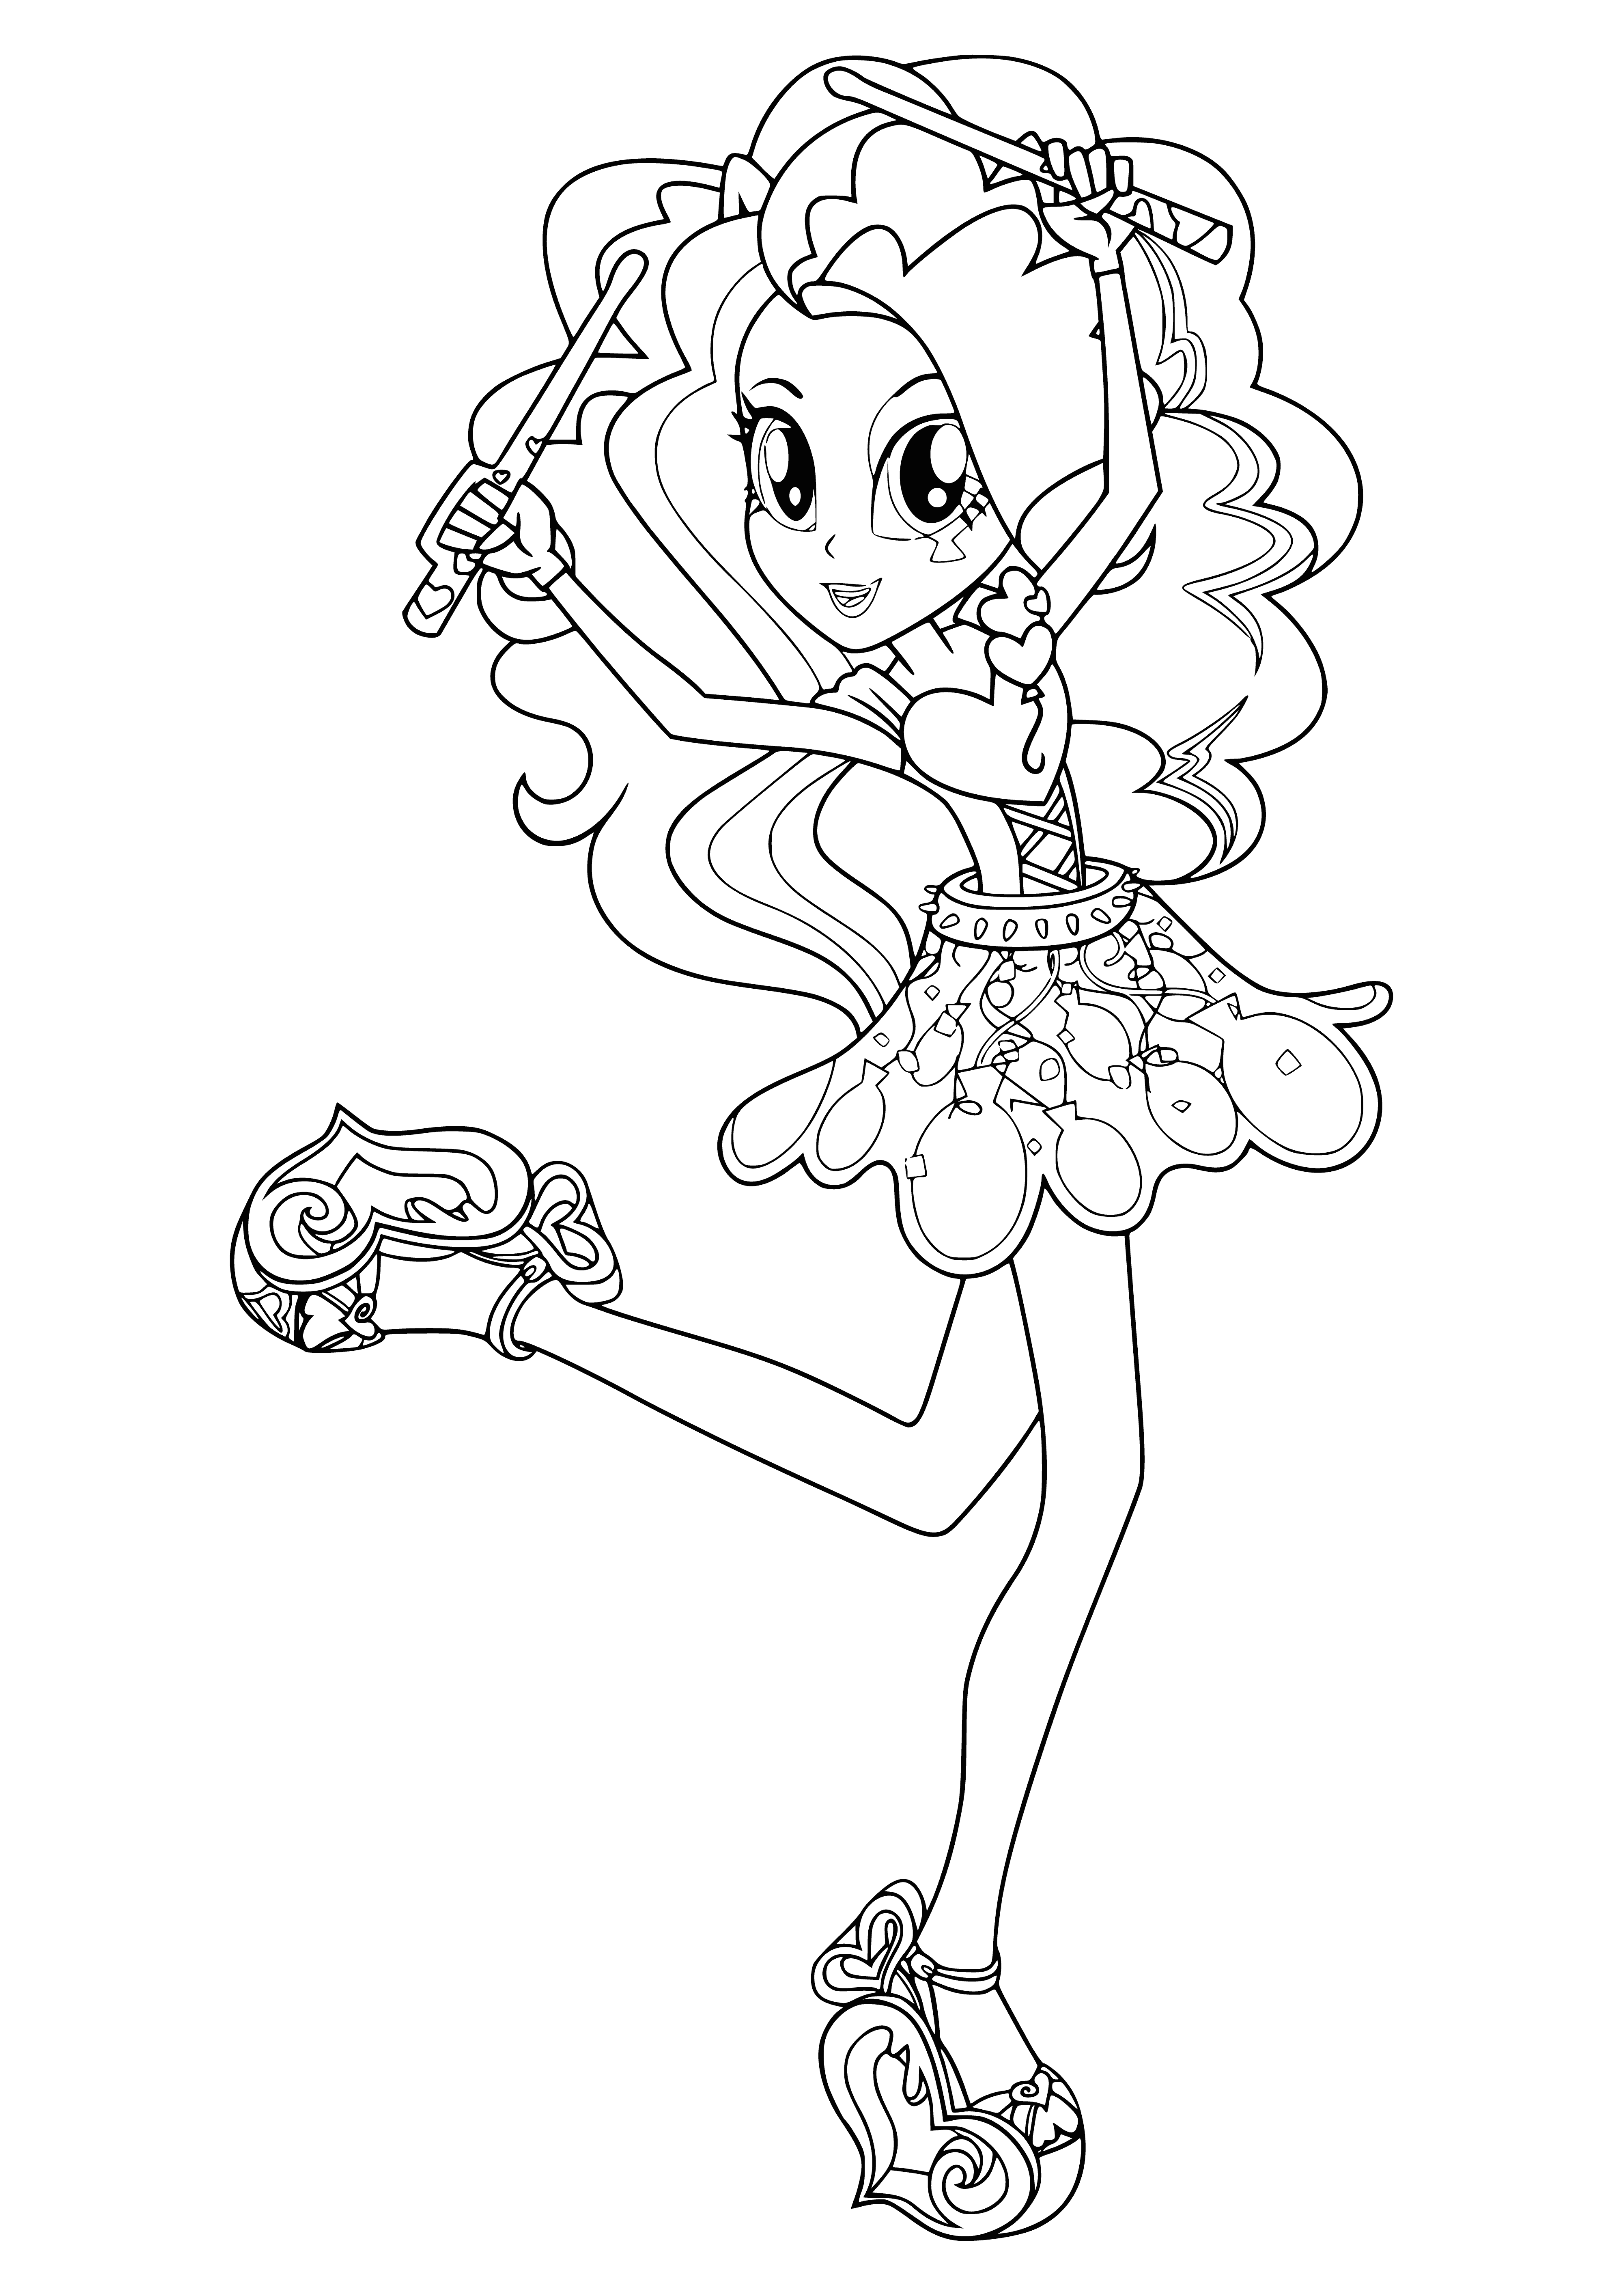 coloring page: The Equestria Girls: Pinkie Pie stands with a guitar in hand, in front of a rainbow, ready to rock! #RainbowRock